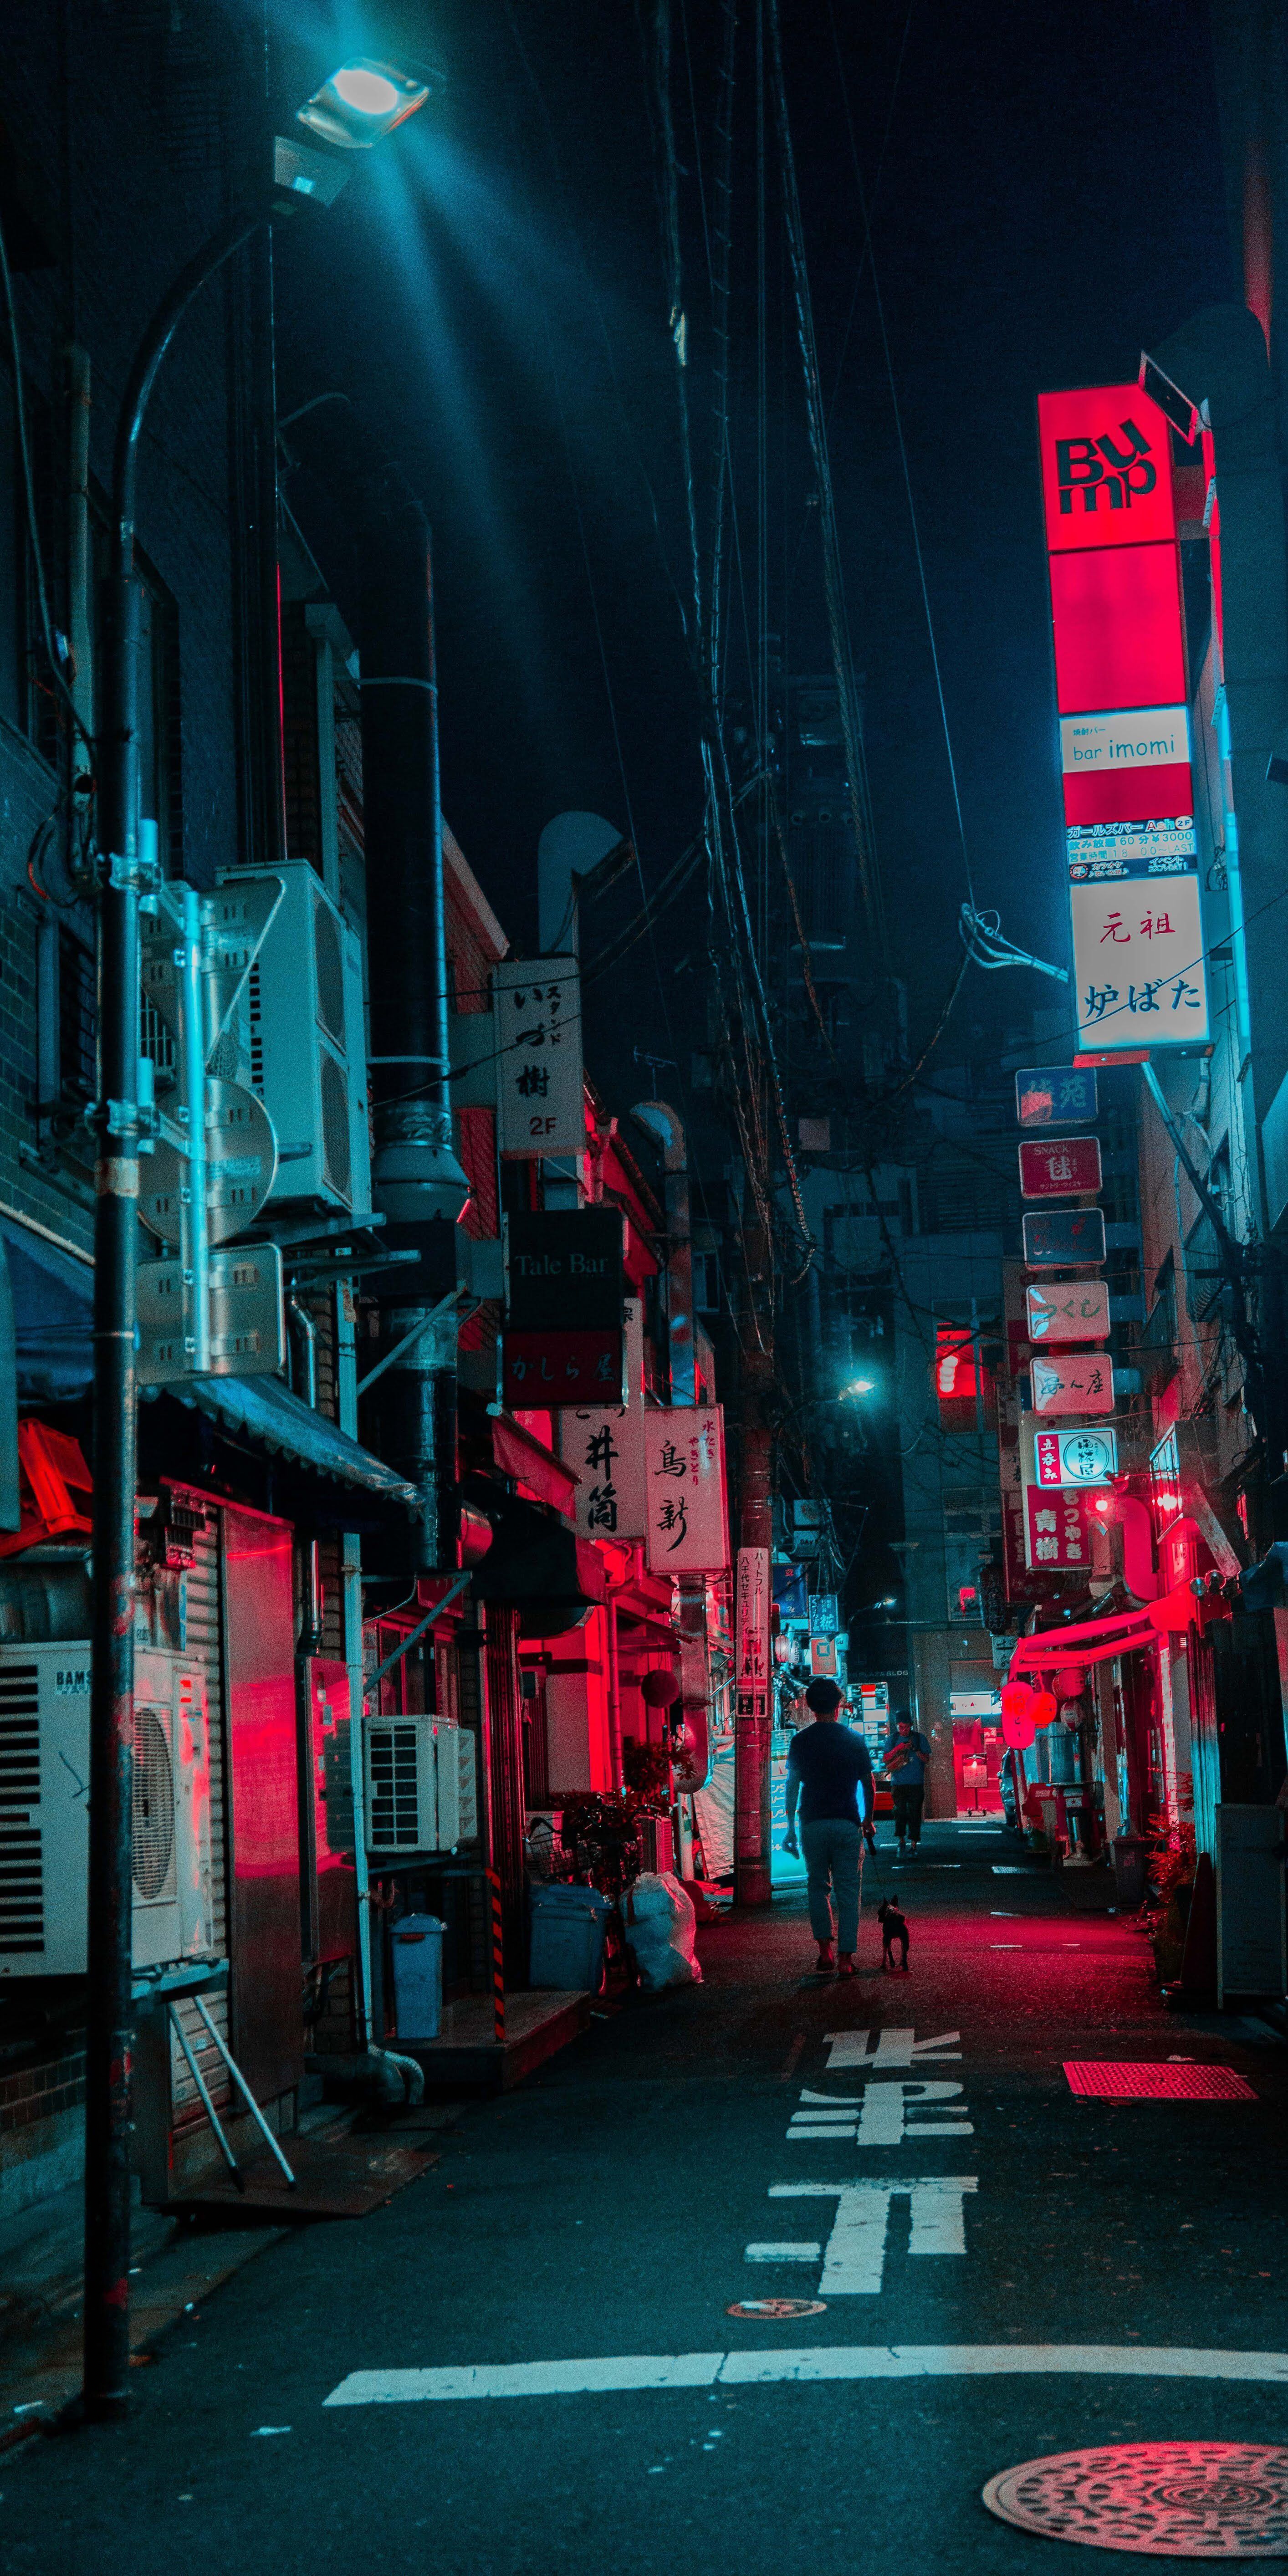 A person walking down a dark alley with red lights - Cyberpunk